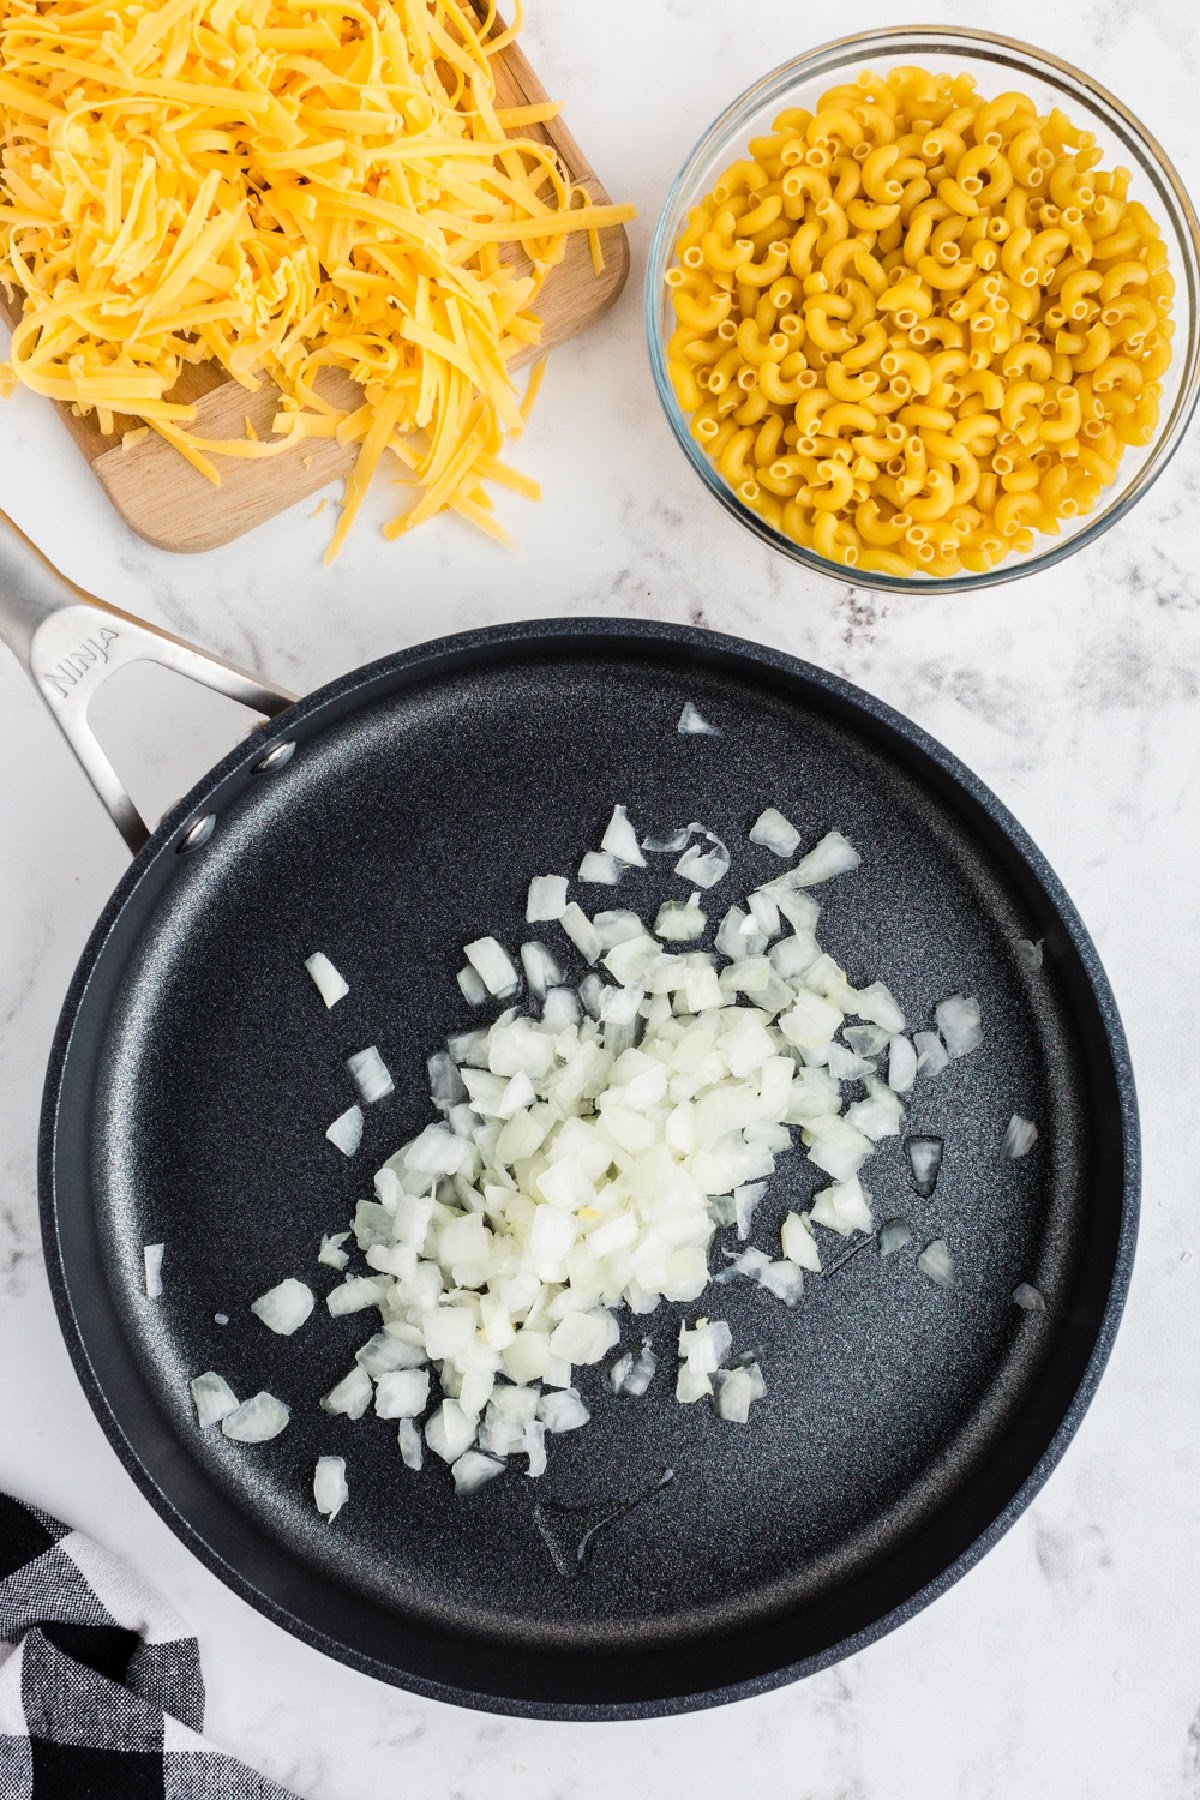 Diced onions in skillet with oil.